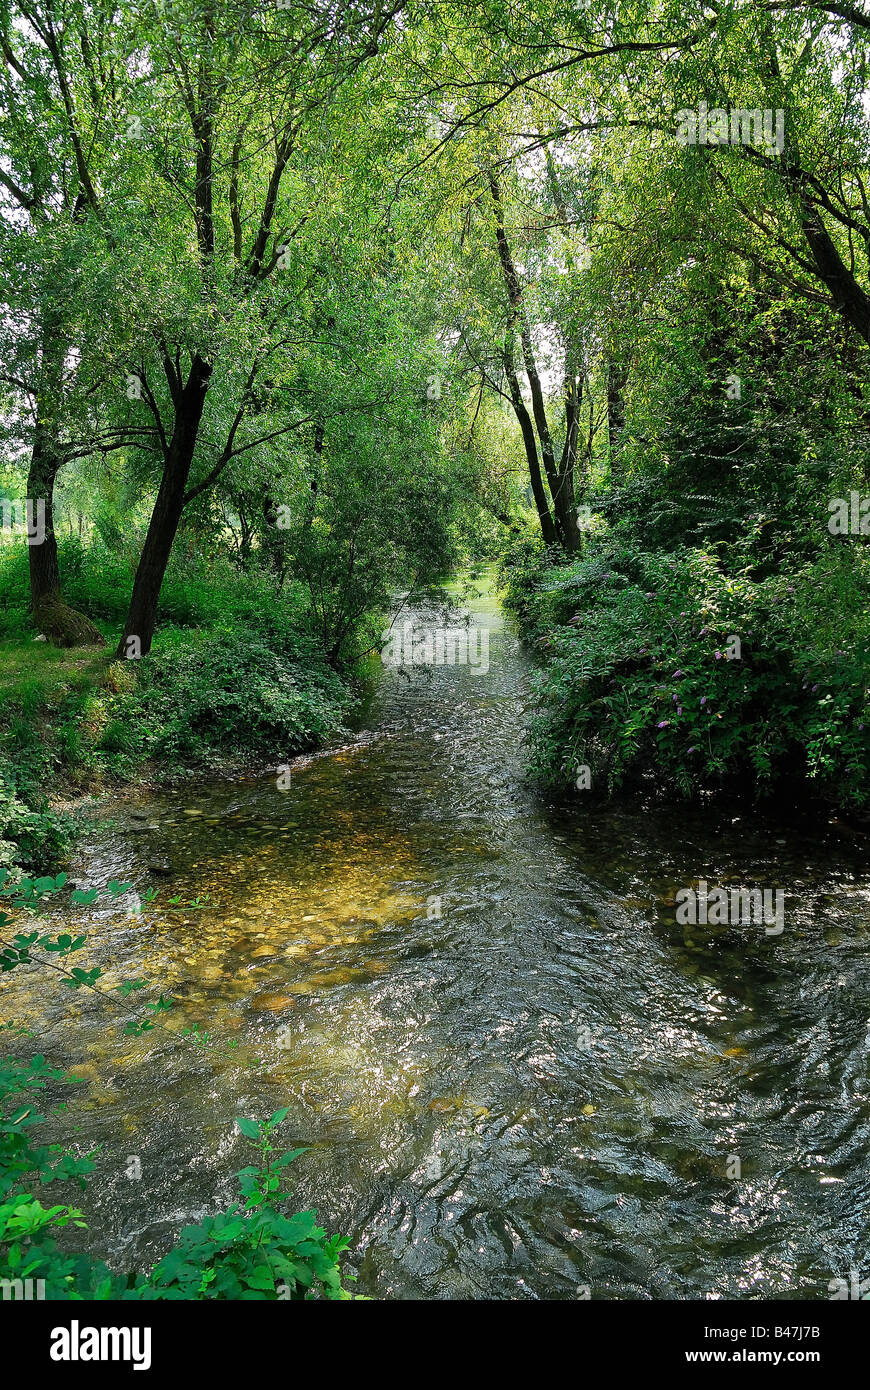 Tezze sul Brenta,Italy,a stream in a wood Stock Photo